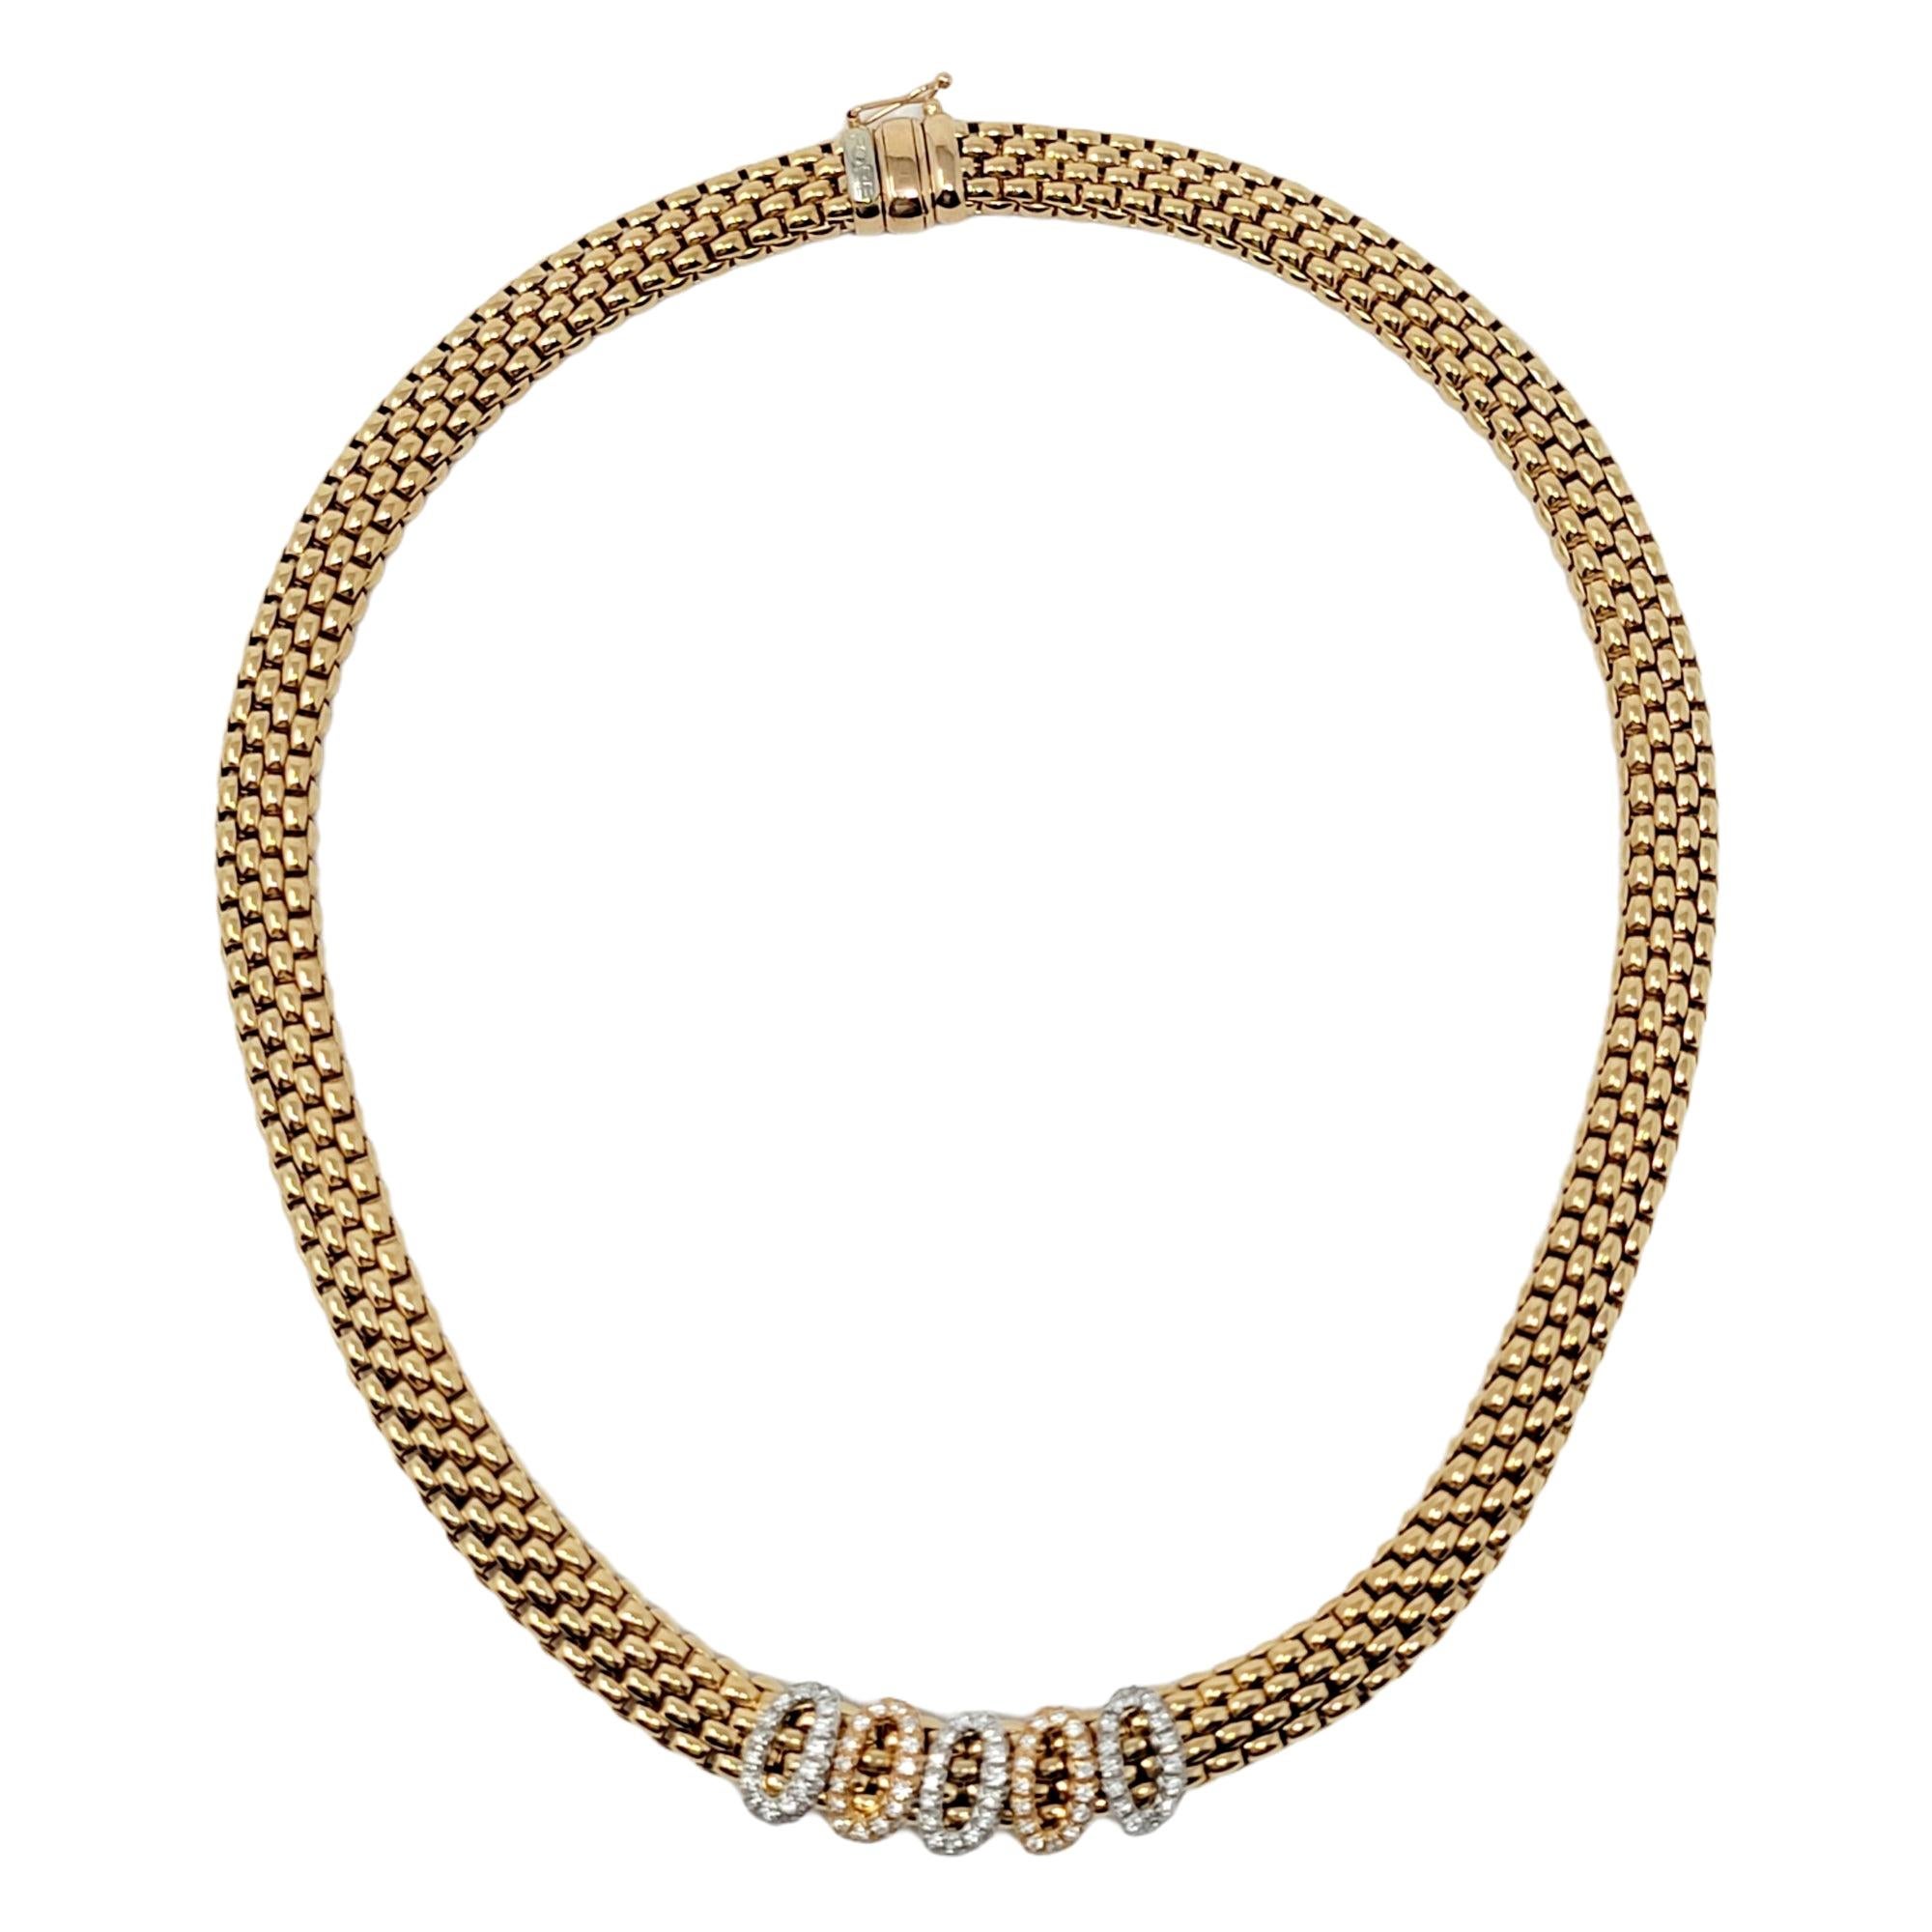 Fope Novecento Mesh Tri-Tone 18 Karat Gold and Pave Diamond Necklace .75 Carats For Sale